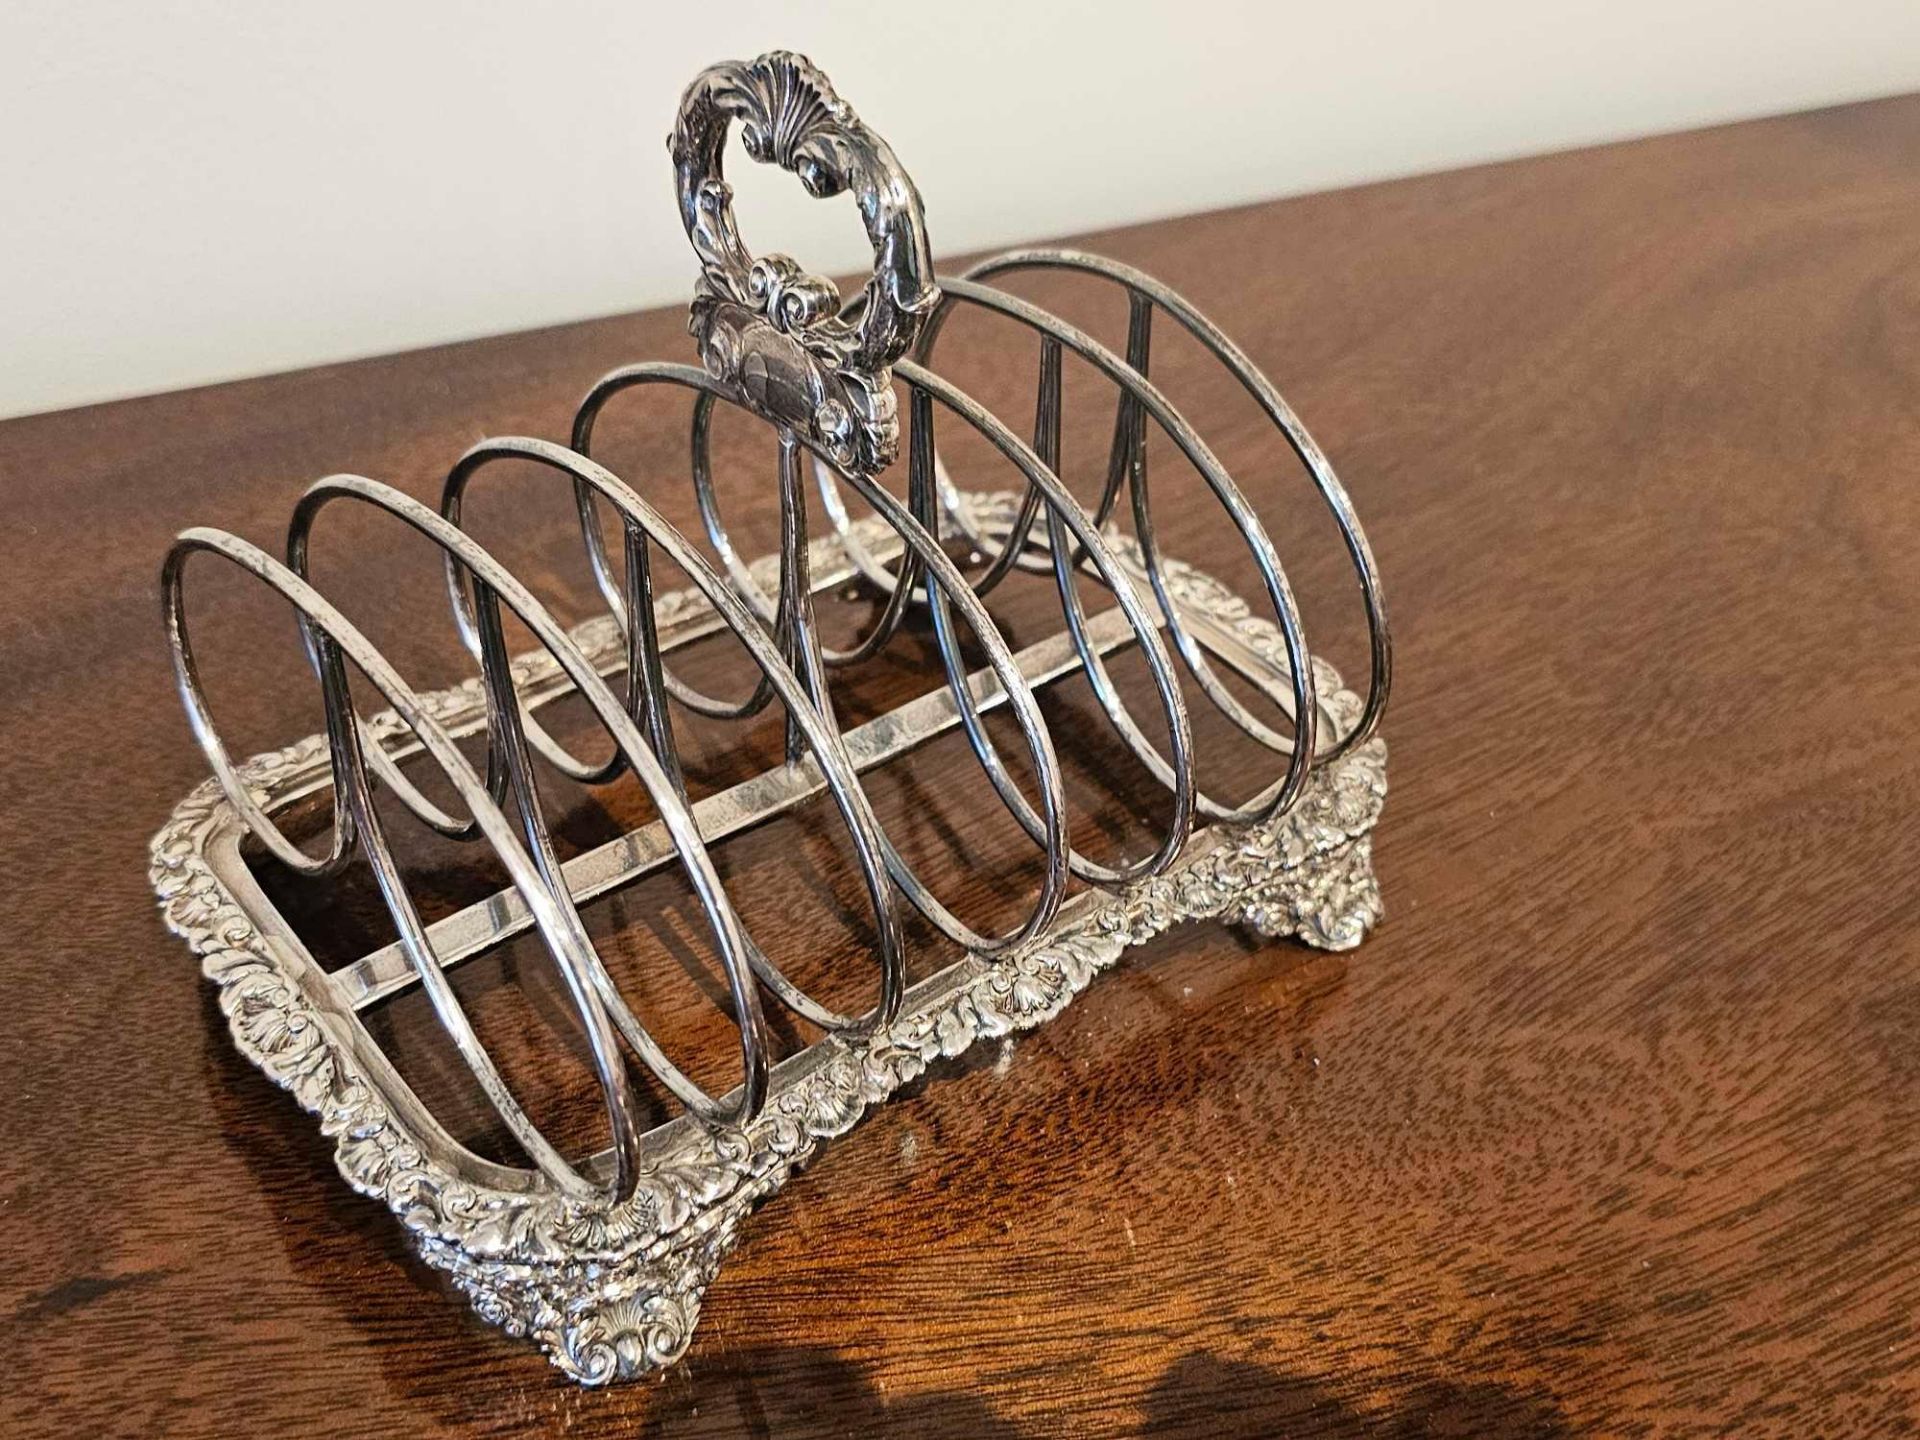 A George IV Style Silver Toast Rack 7 Bar With Rocaille Oval Handle And Border On Similar Bracket - Image 3 of 3